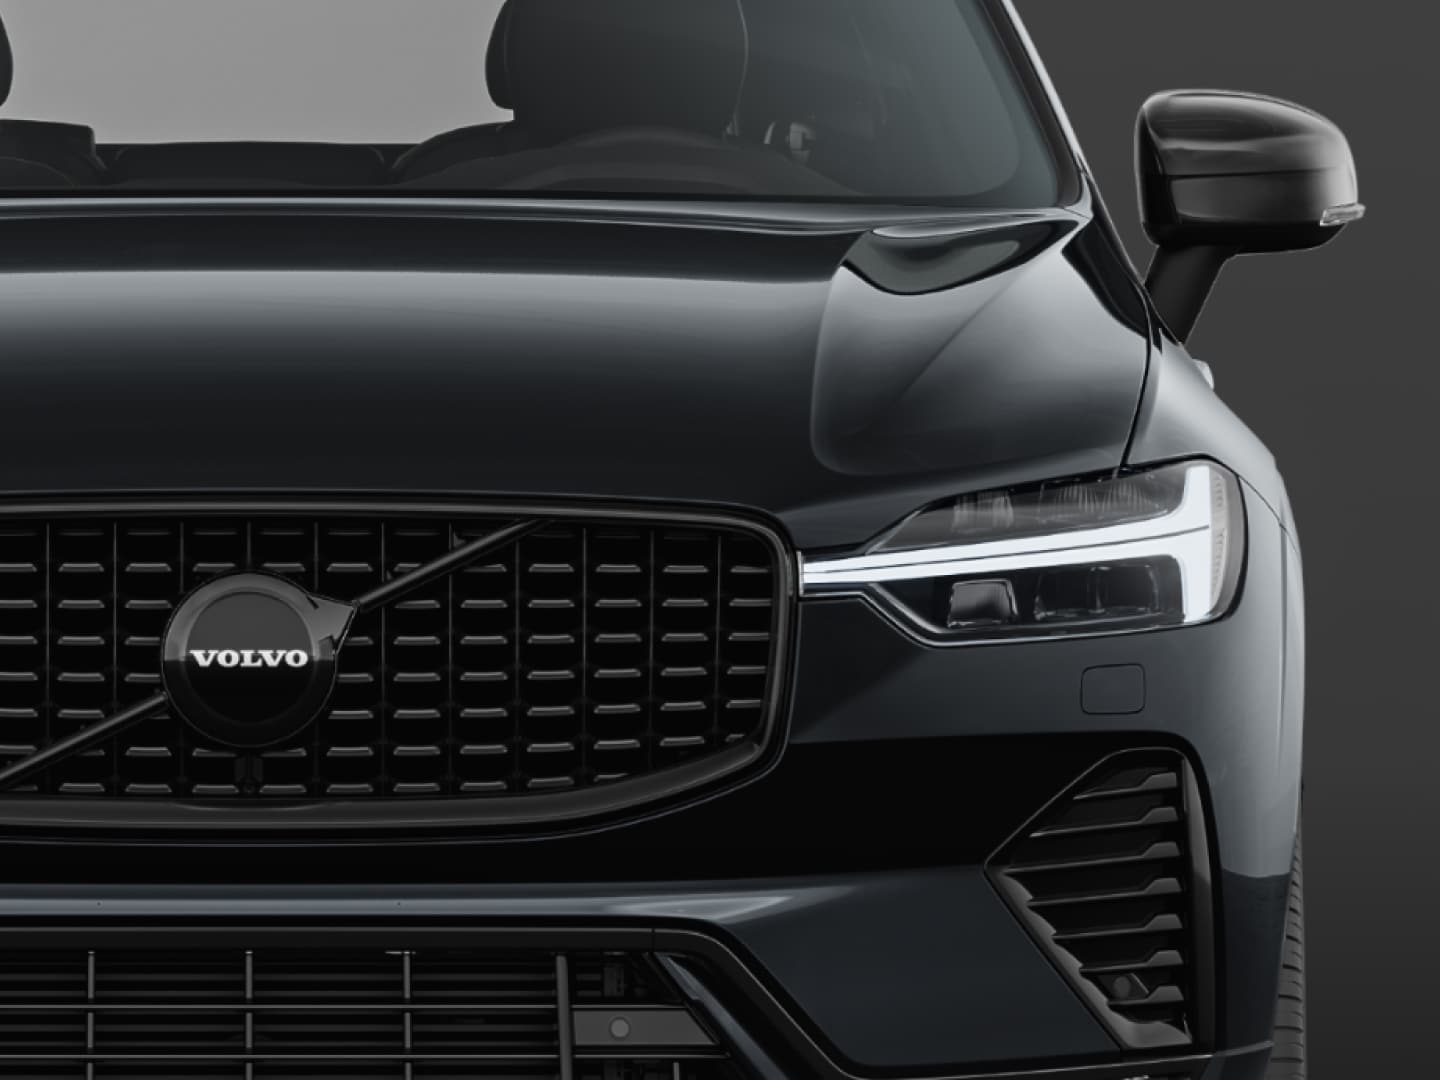 Blacked-out exterior details on the Volvo XC60 Black Edition Mild hybrid.